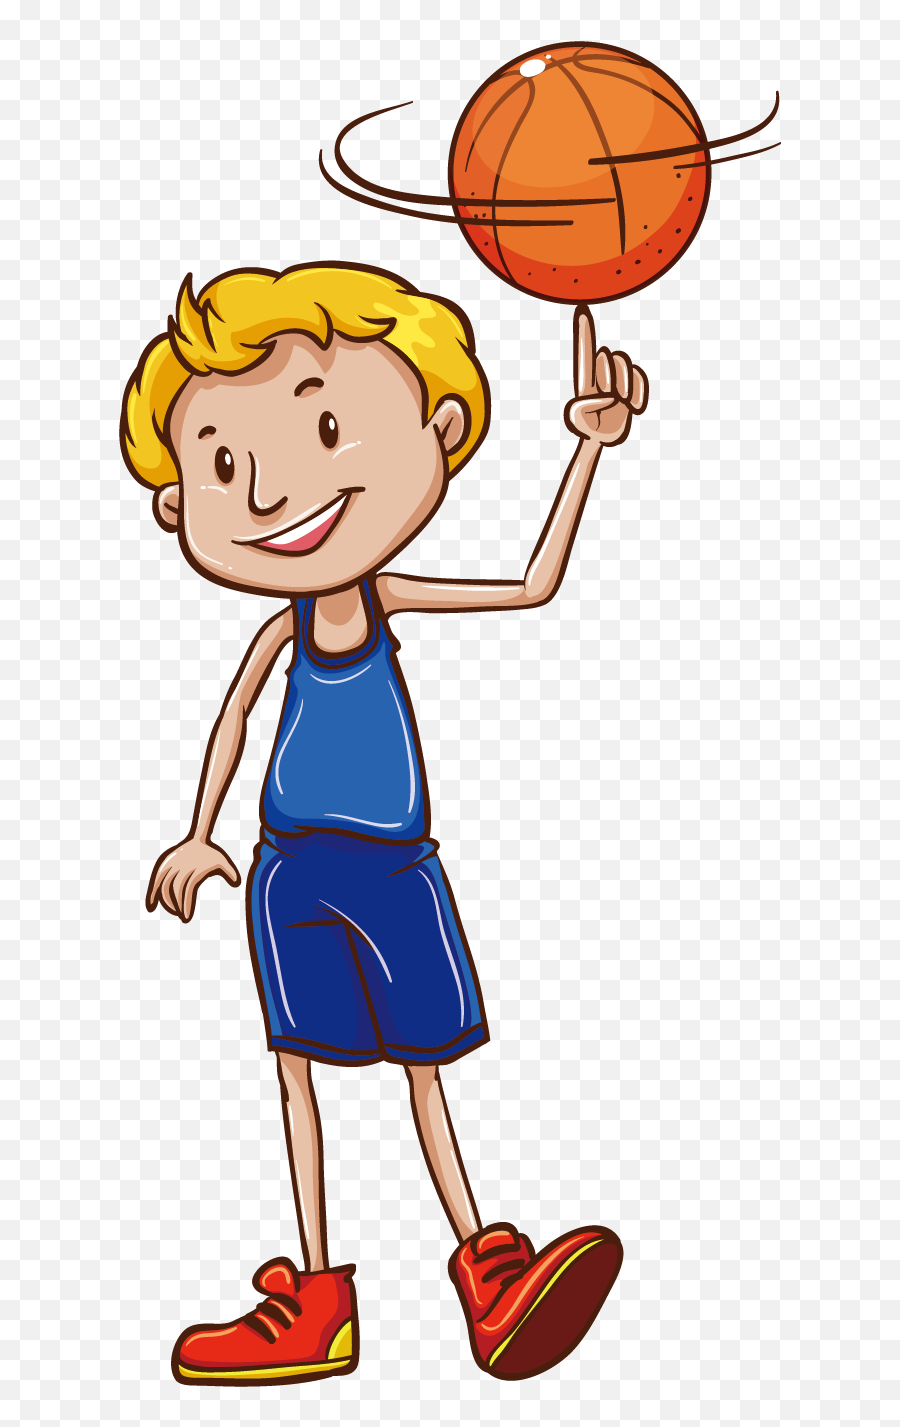 Download Balloon Clipart Basketball - Transparent Background Basketball Players Clipart Png,Cartoon Basketball Png